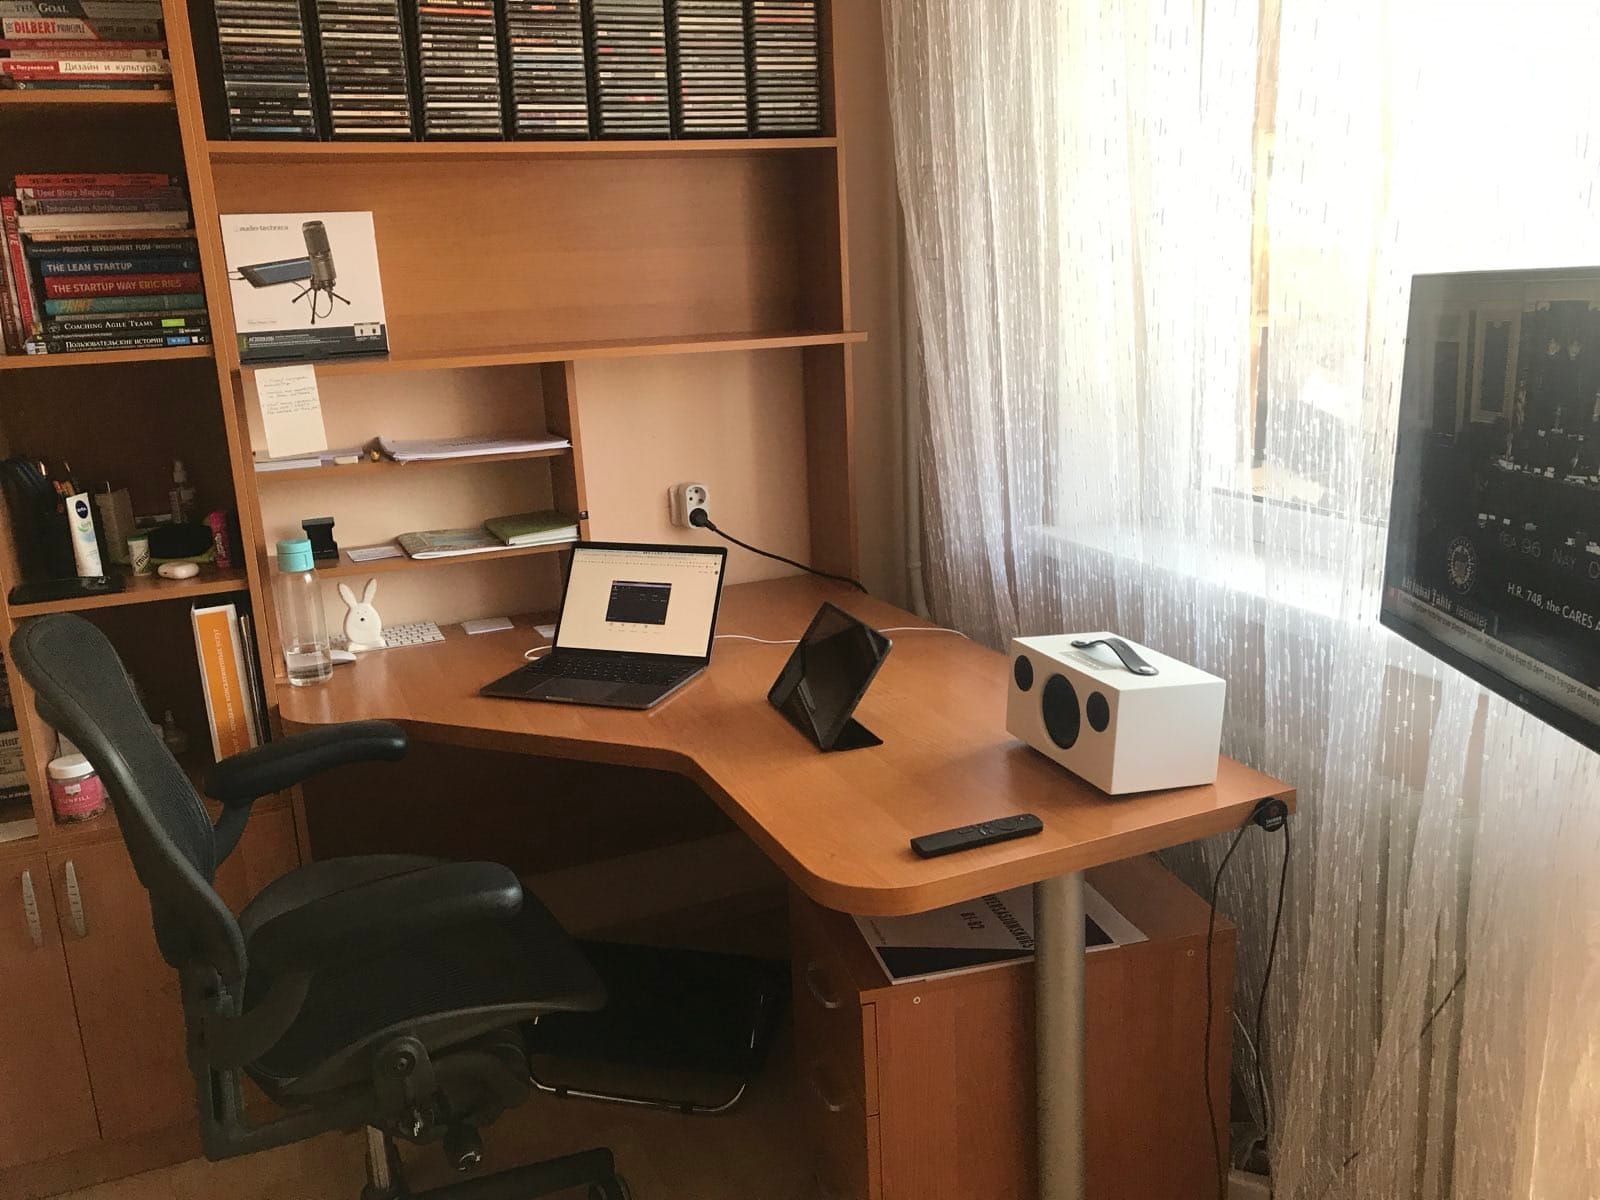 A pre-war home office setup, nothing fancy though reliable